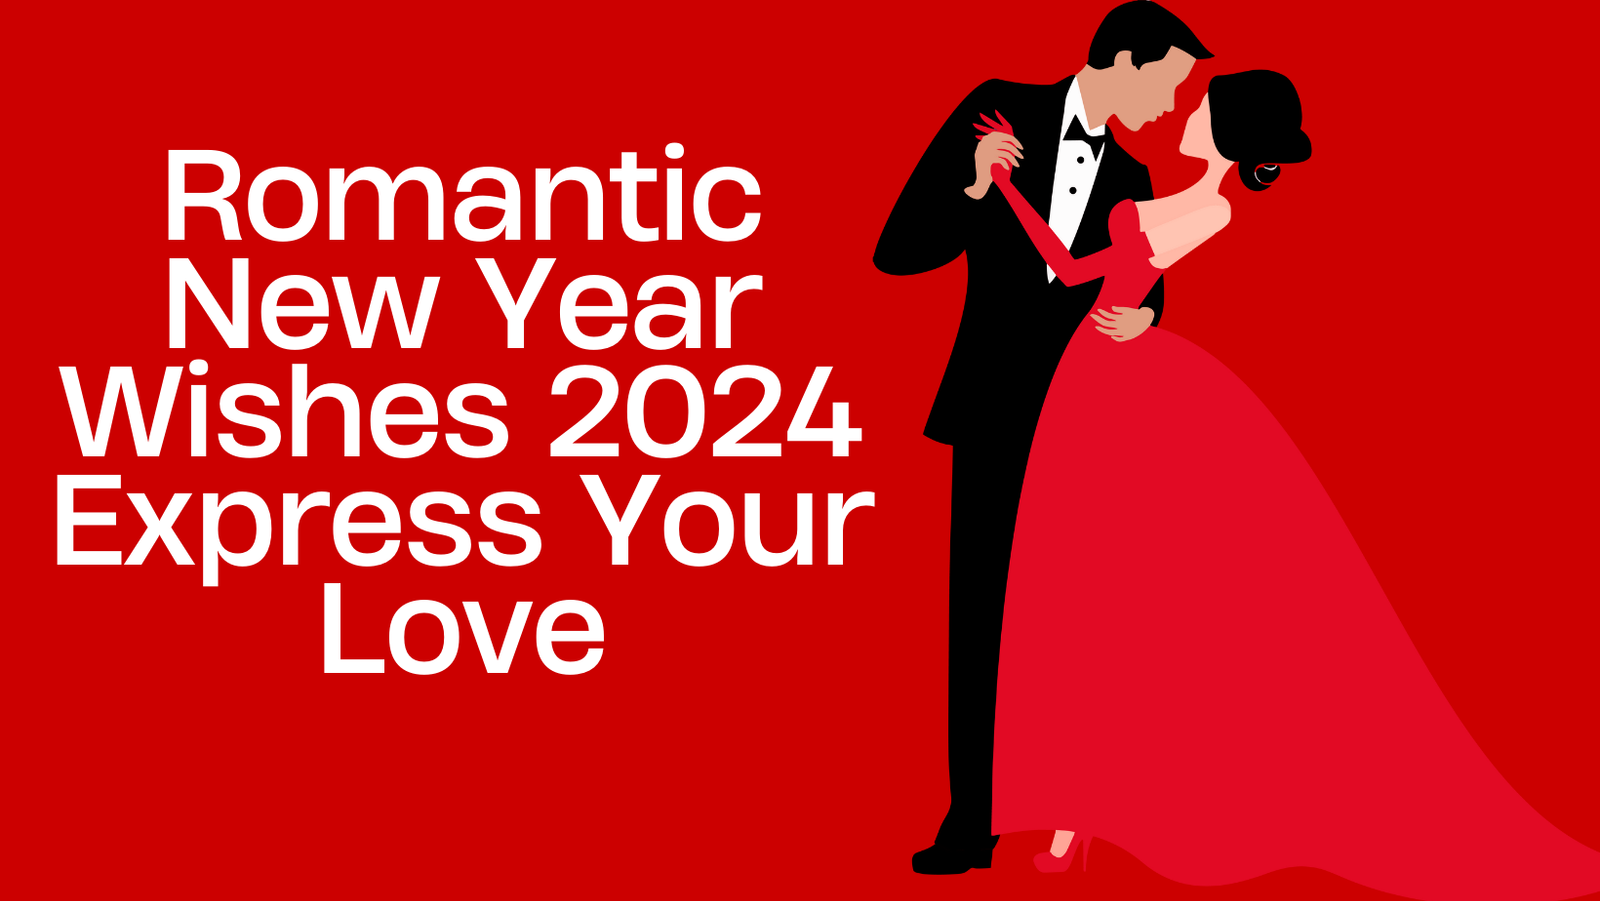 10 Heartfelt and Romantic New Year Wishes 2024 to Express Your Love